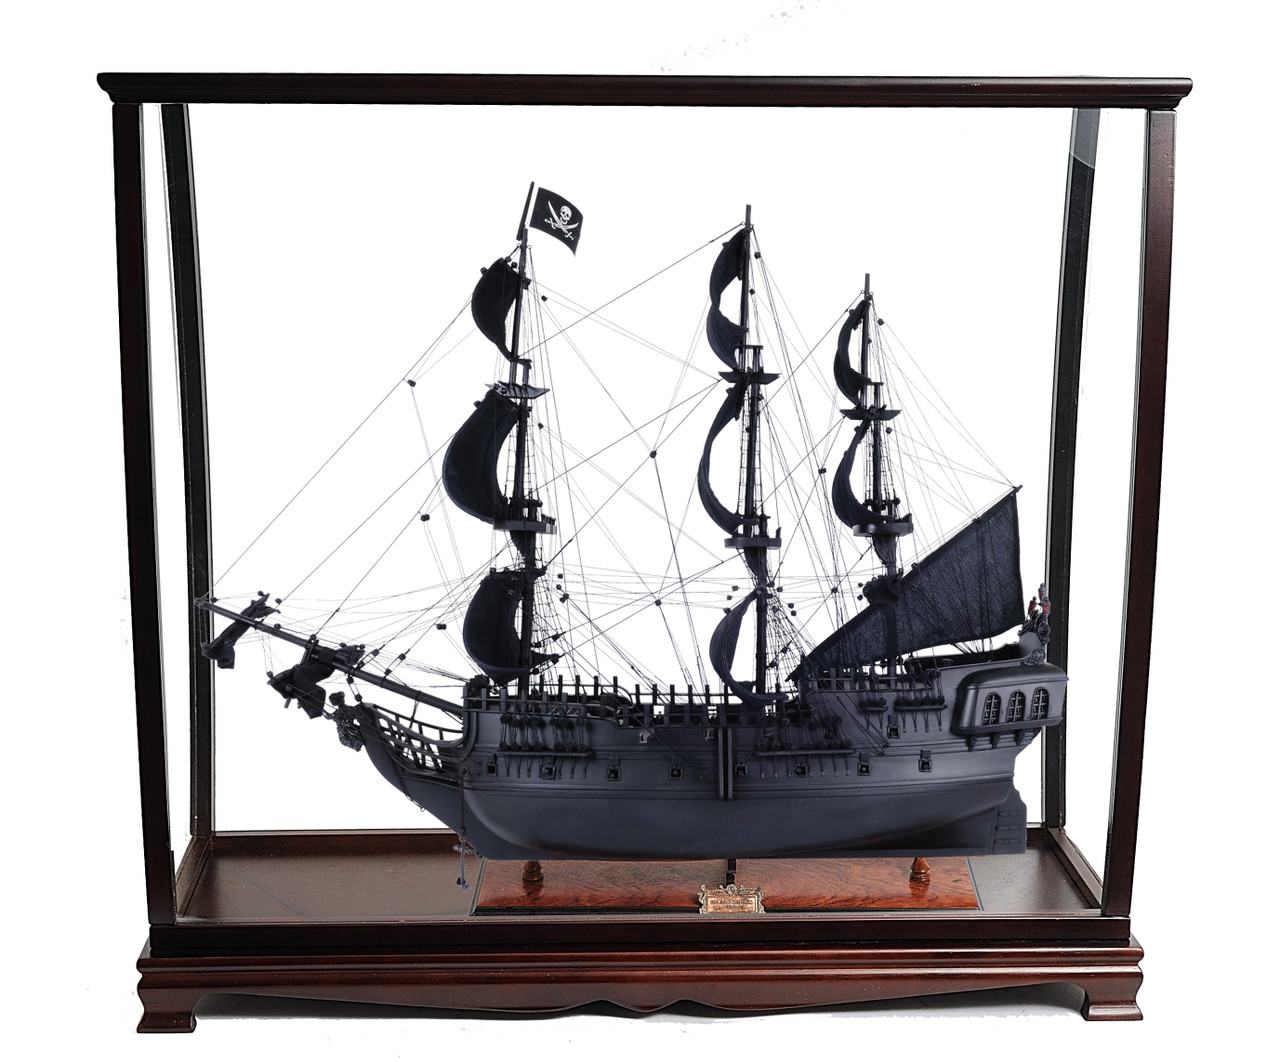 Black Pearl Pirate Model Ship - 29" w/ Table Top Display Case